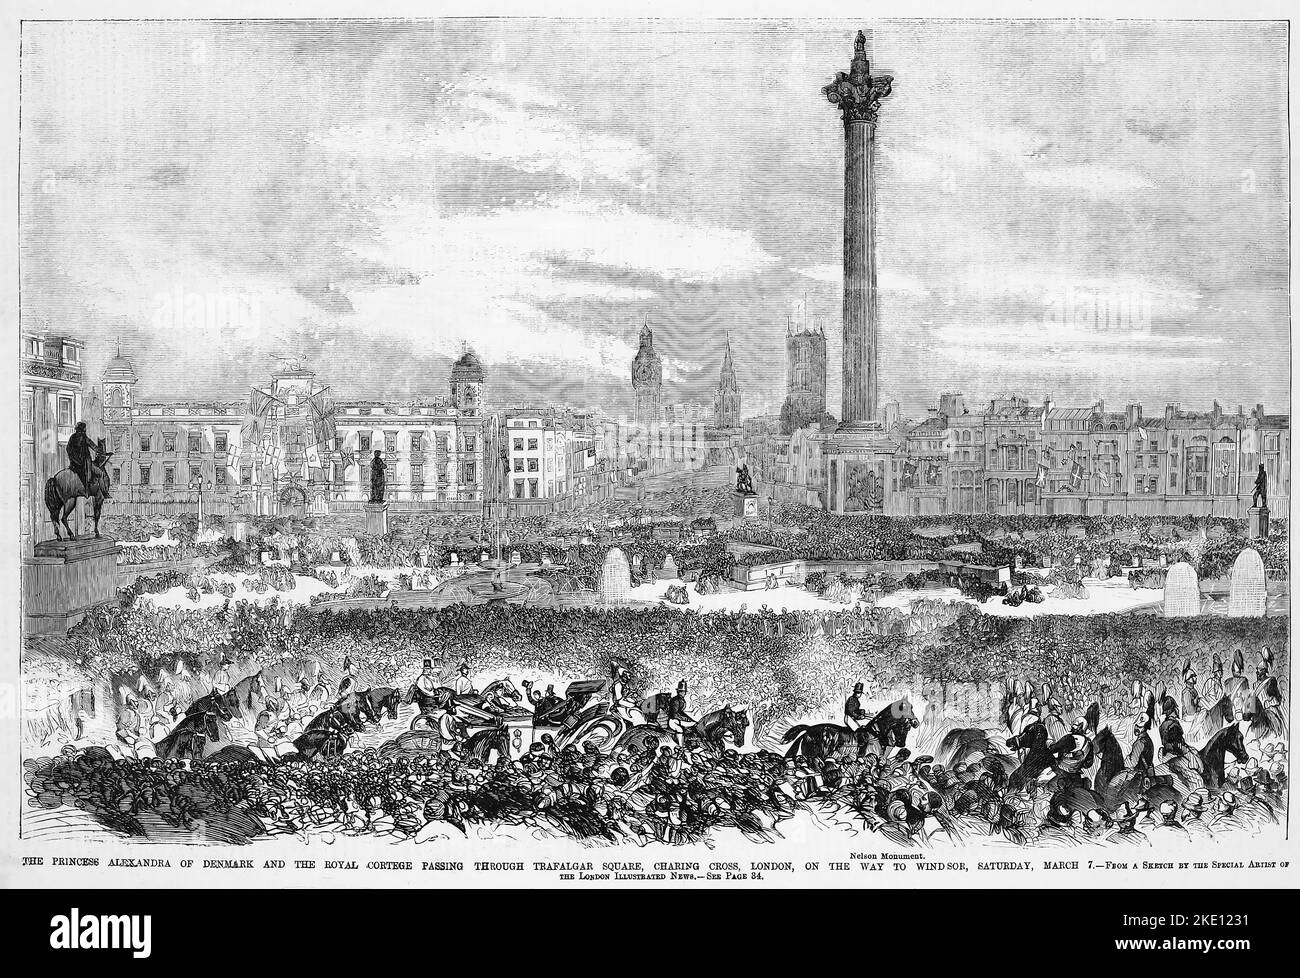 The Princess Alexandra of Denmark and the Royal cortege passing through Trafalgar Square, Charing Cross, London, England, on the way to Windsor, Saturday, March 7th, 1863. Wedding of Albert Edward, Prince of Wales, and Princess Alexandra of Denmark. 19th century illustration from Frank Leslie's Illustrated Newspaper Stock Photo